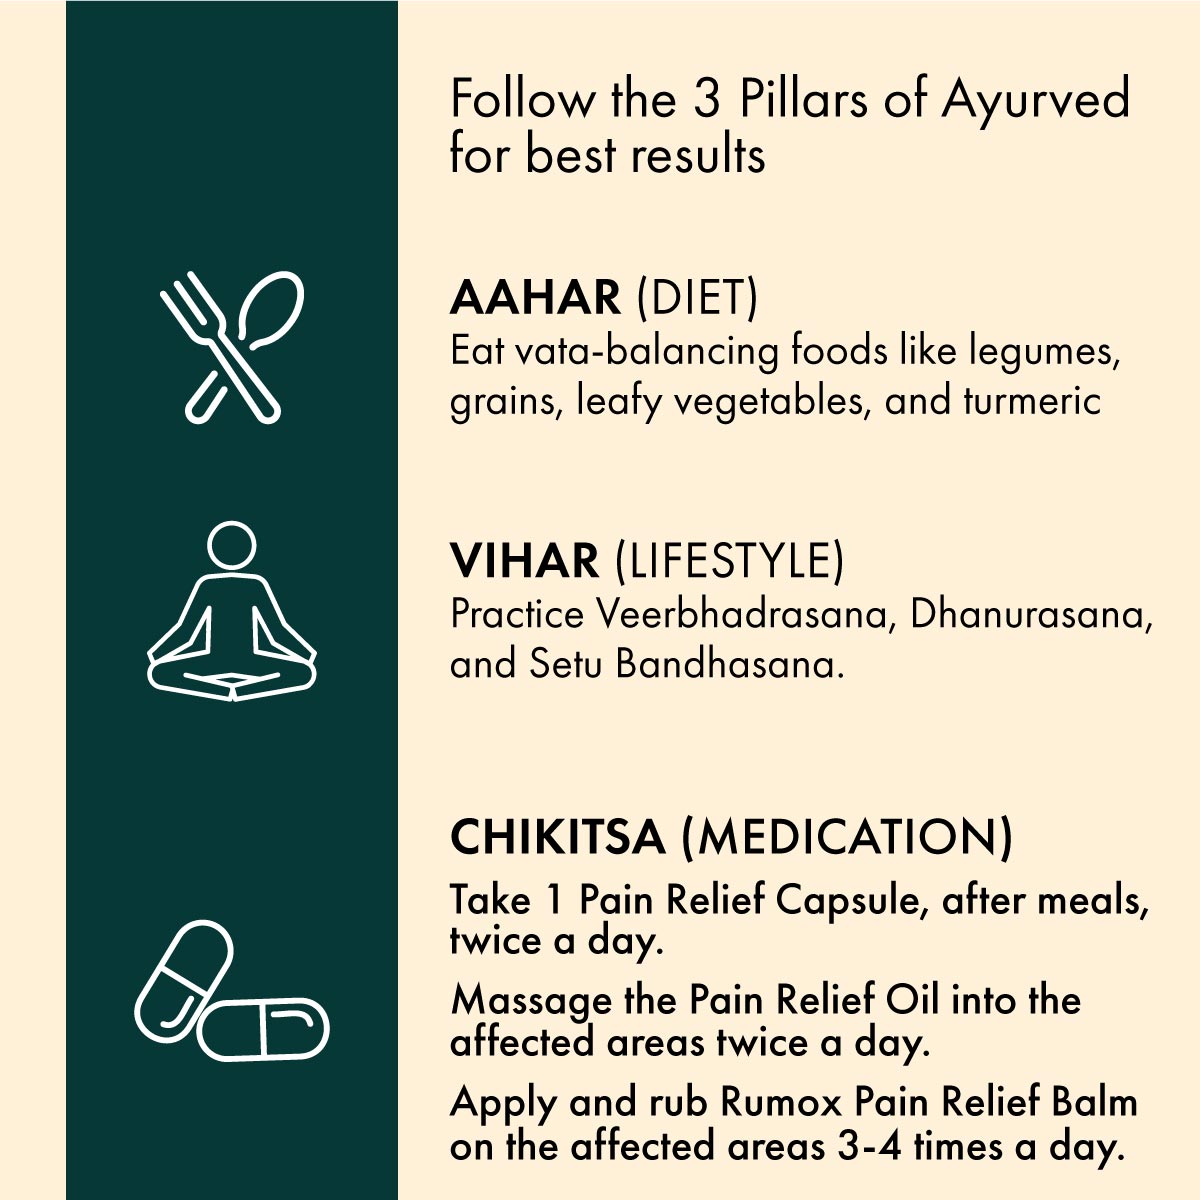 Dr. Vaidya's Joint Pain Relief Pack